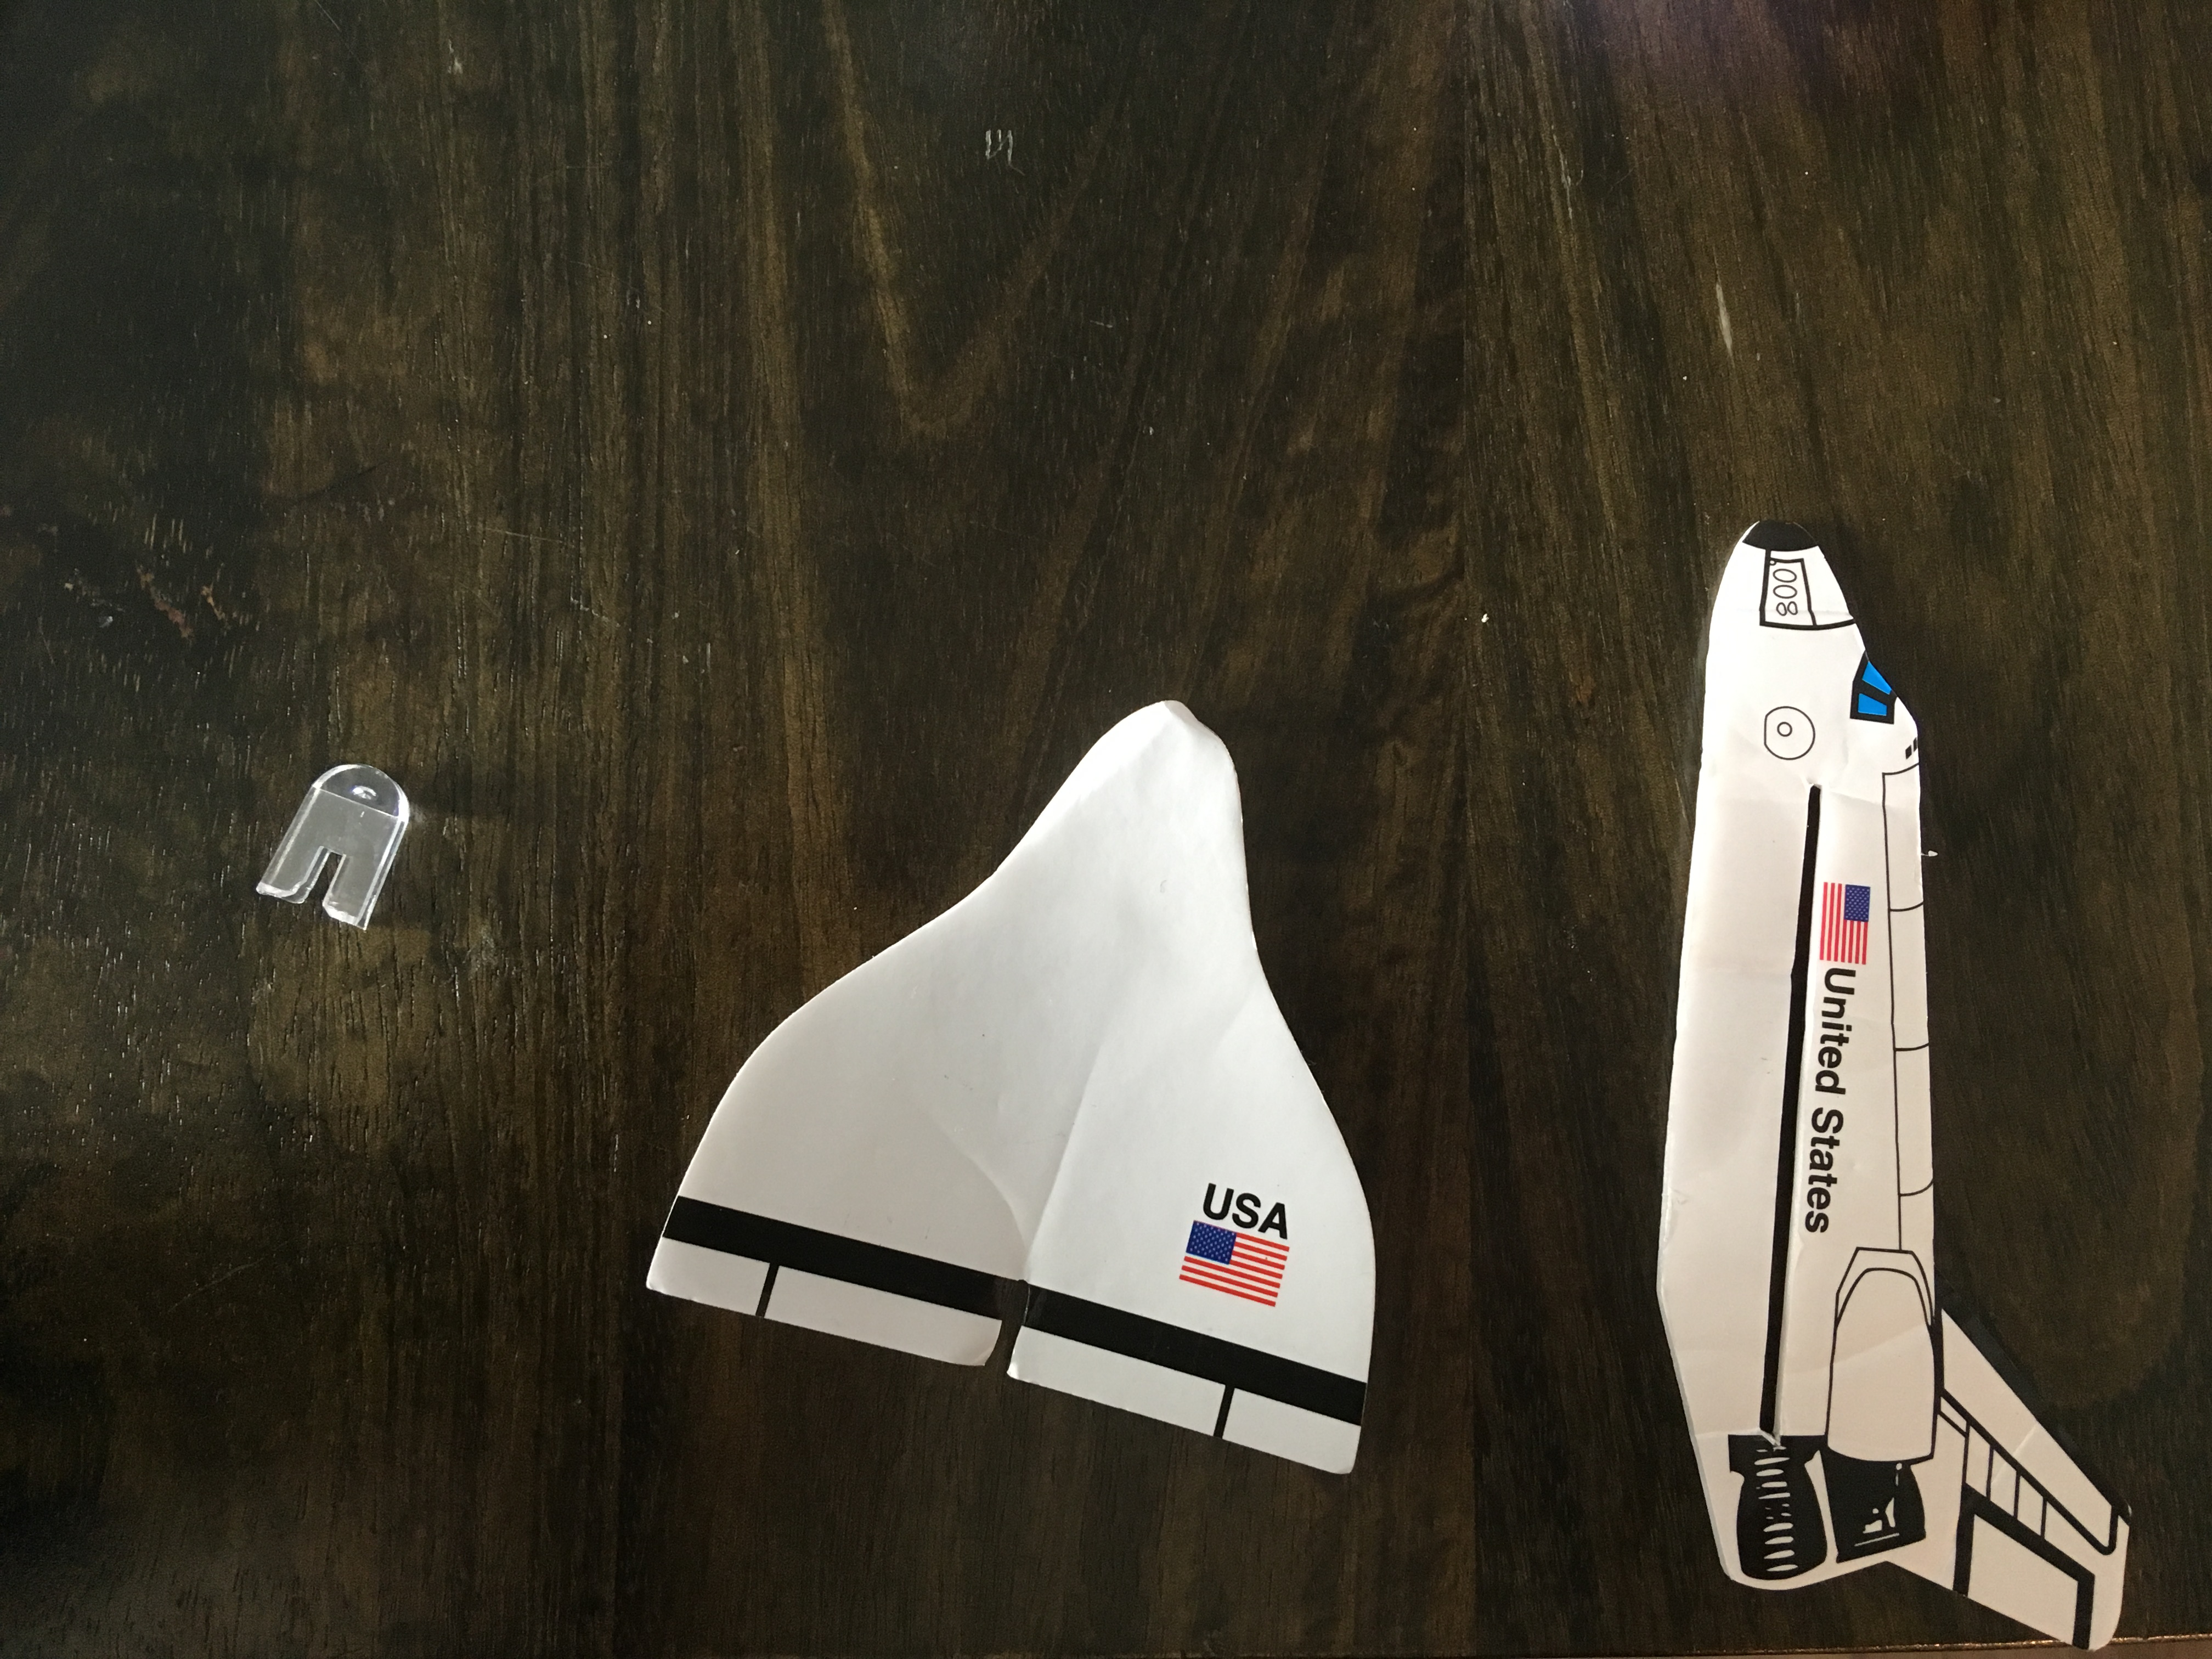 Space shuttle glider components